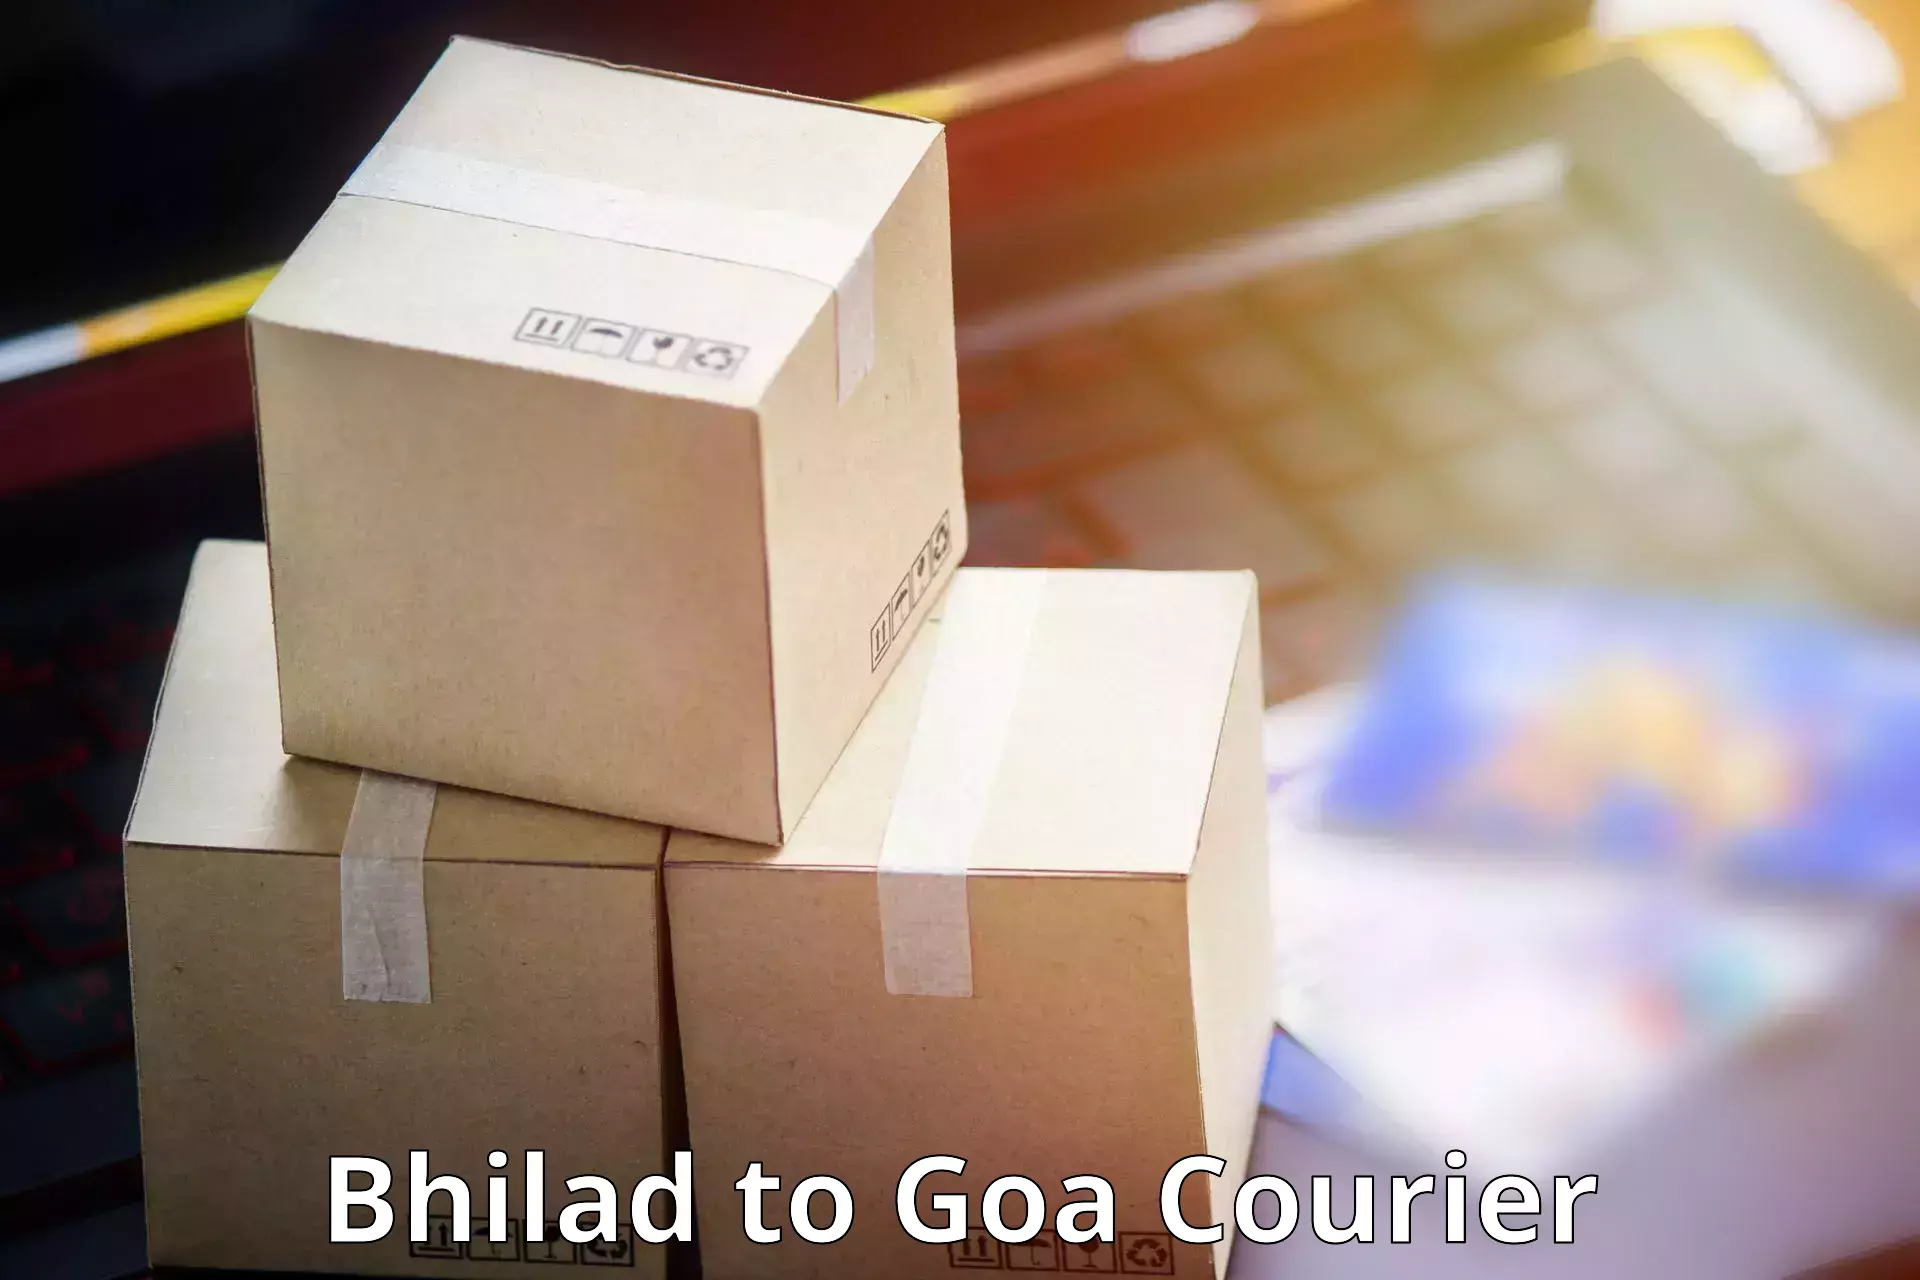 Advanced shipping technology in Bhilad to Goa